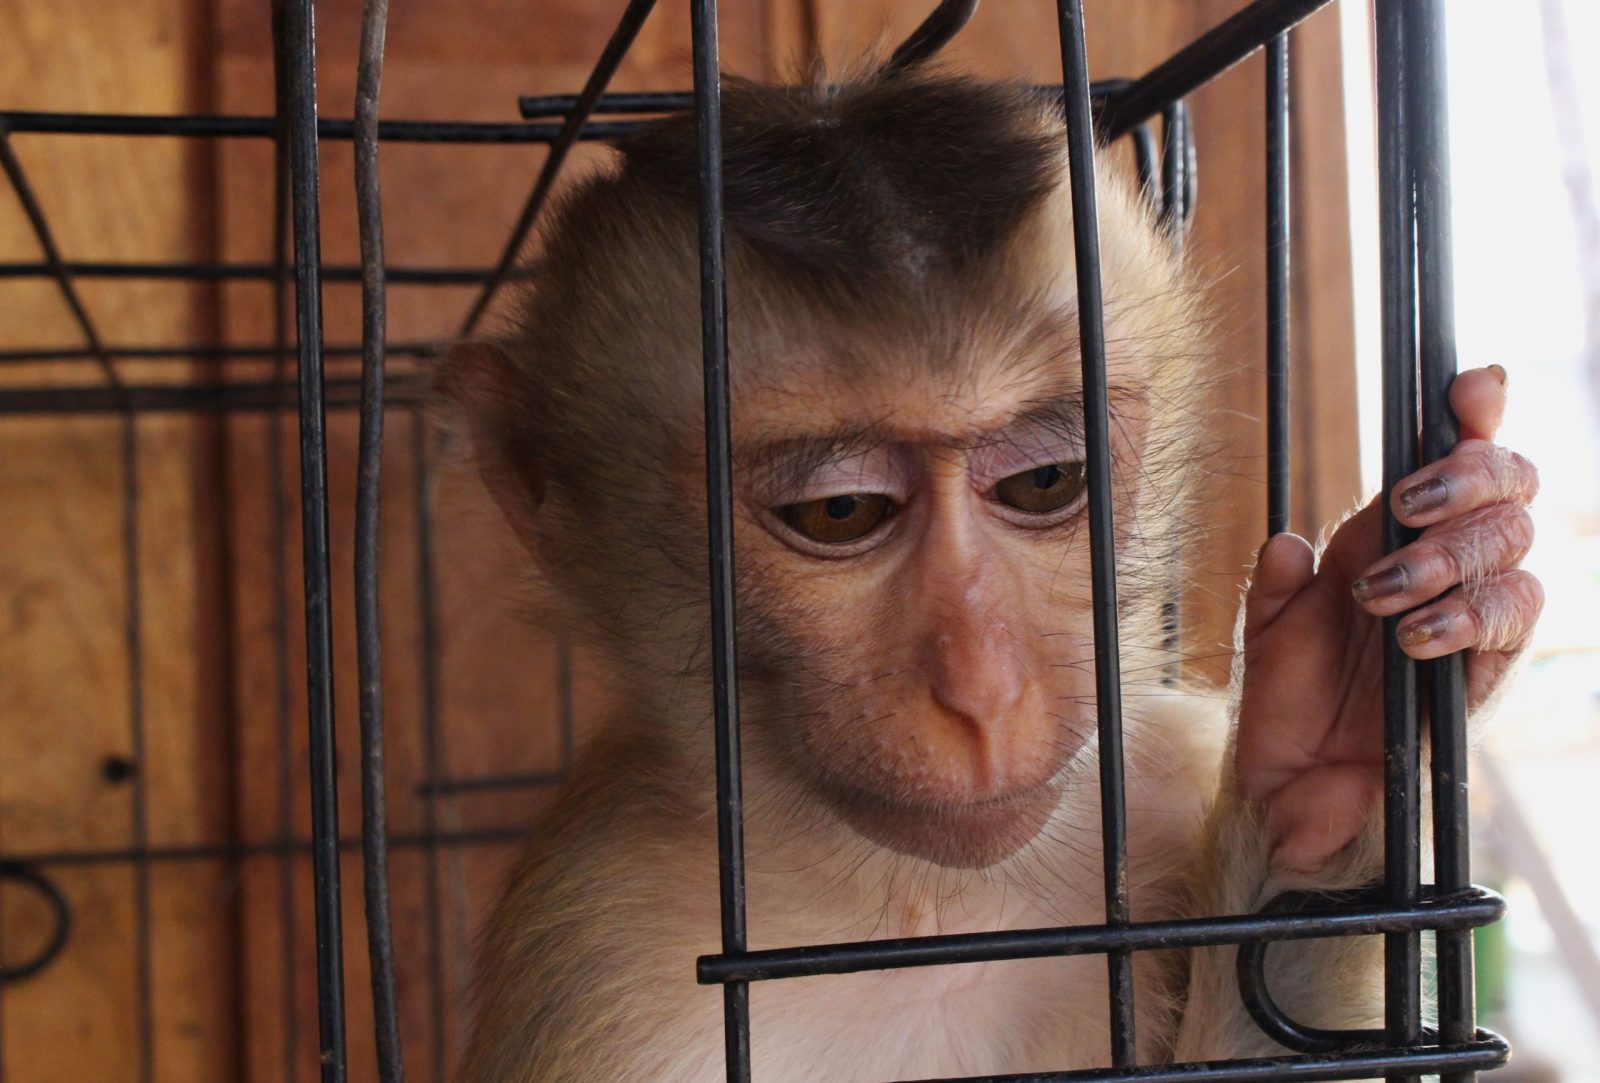 Air France Announced They Will Stop Transporting Non-Human Primates to Laboratories